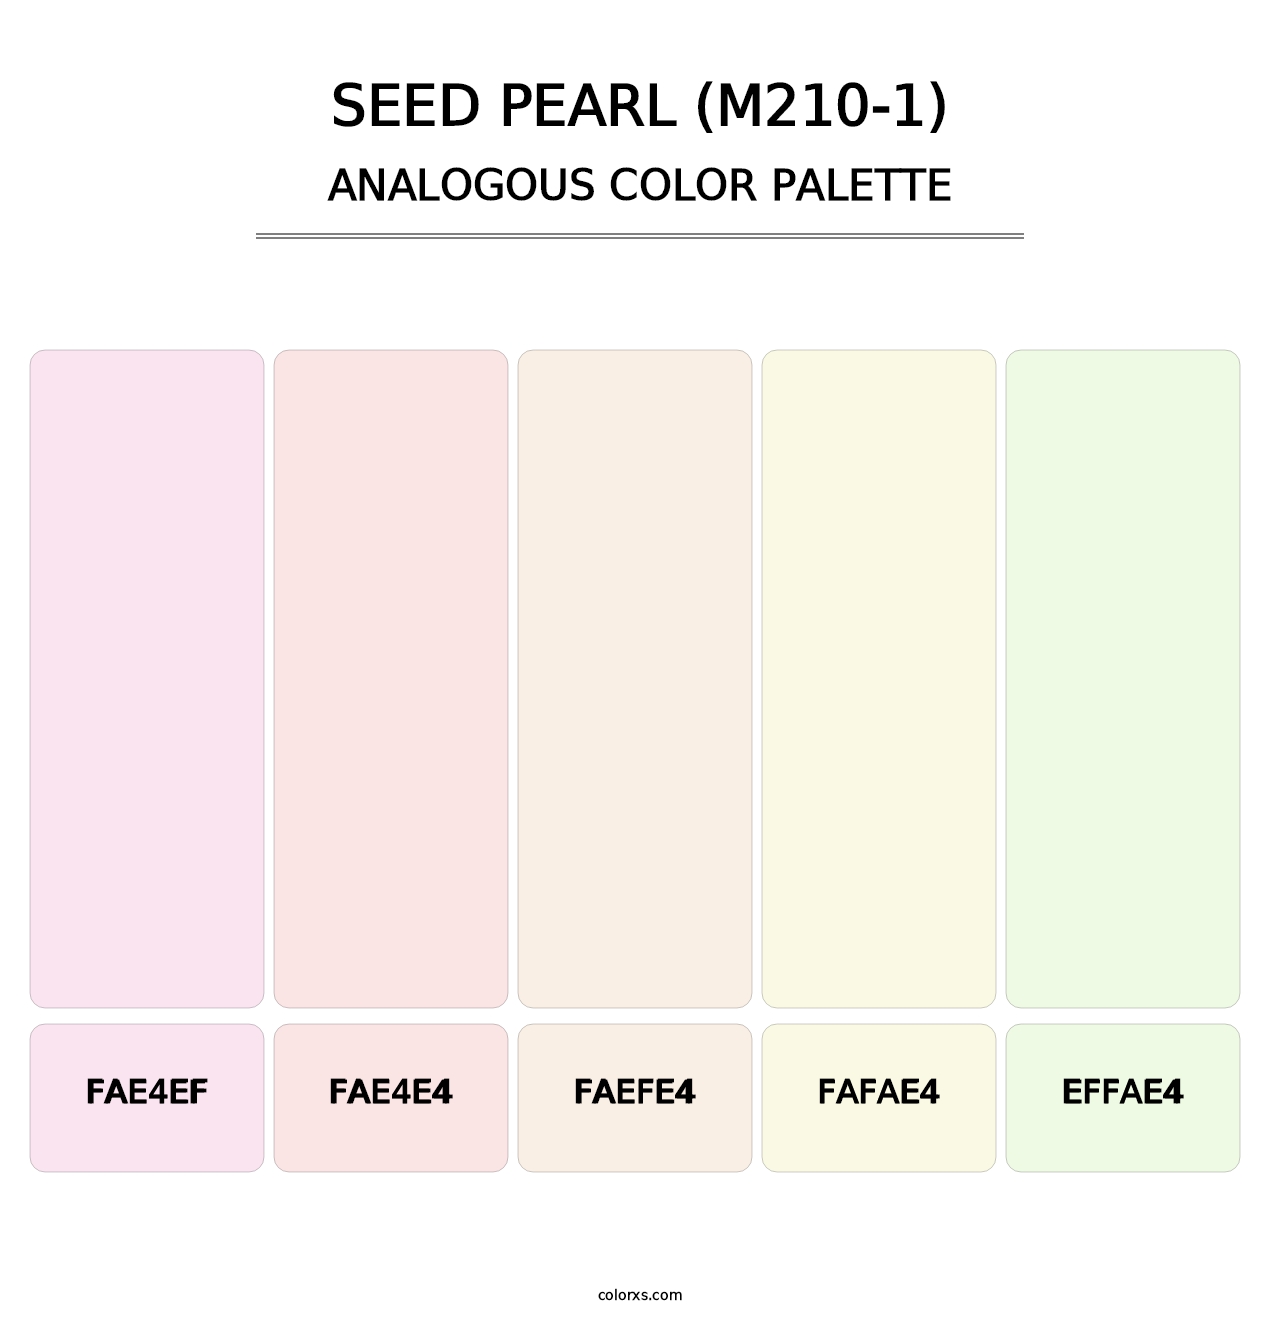 Seed Pearl (M210-1) - Analogous Color Palette